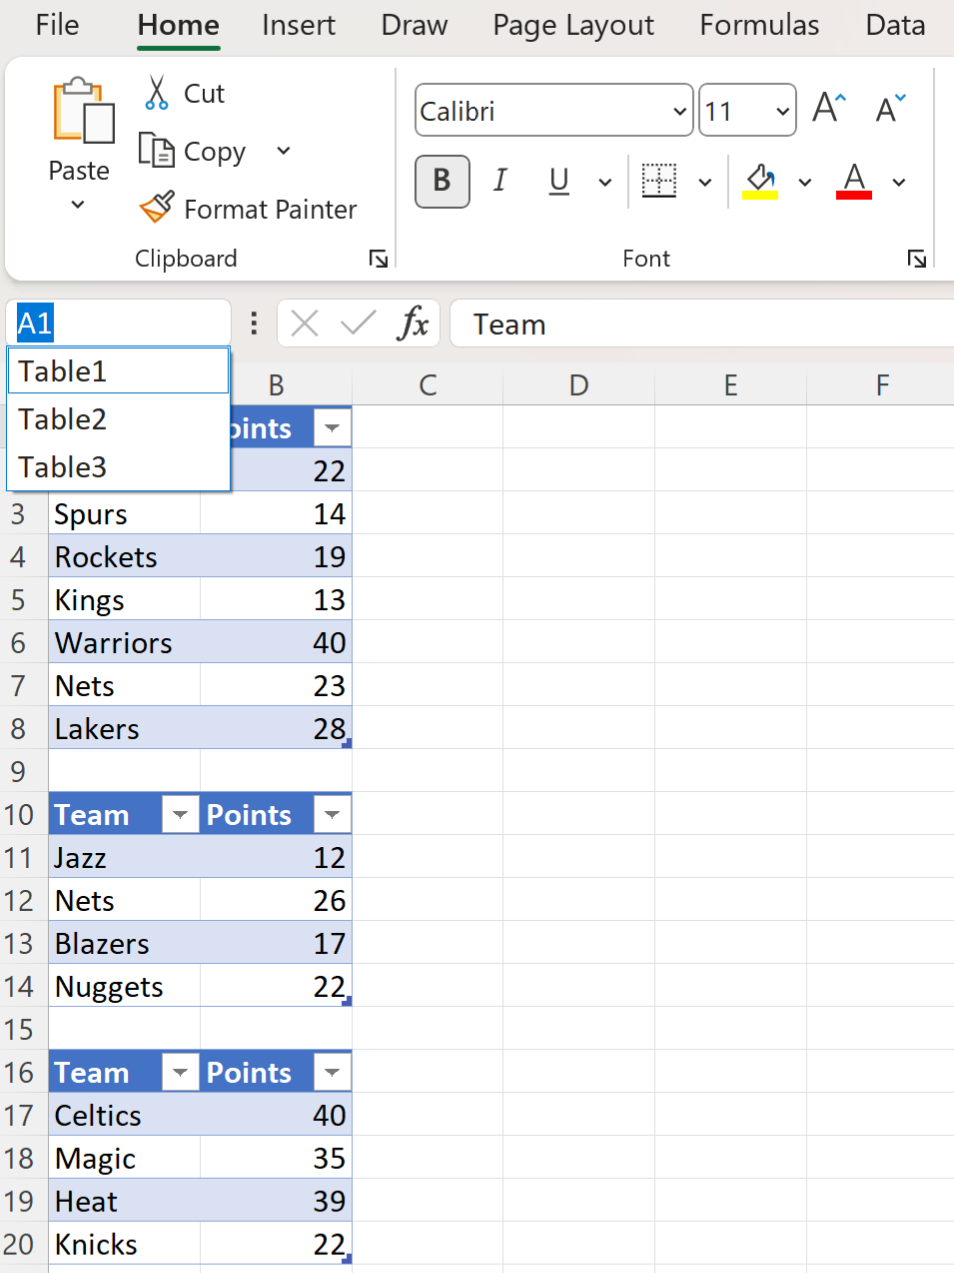 Excel list all table names